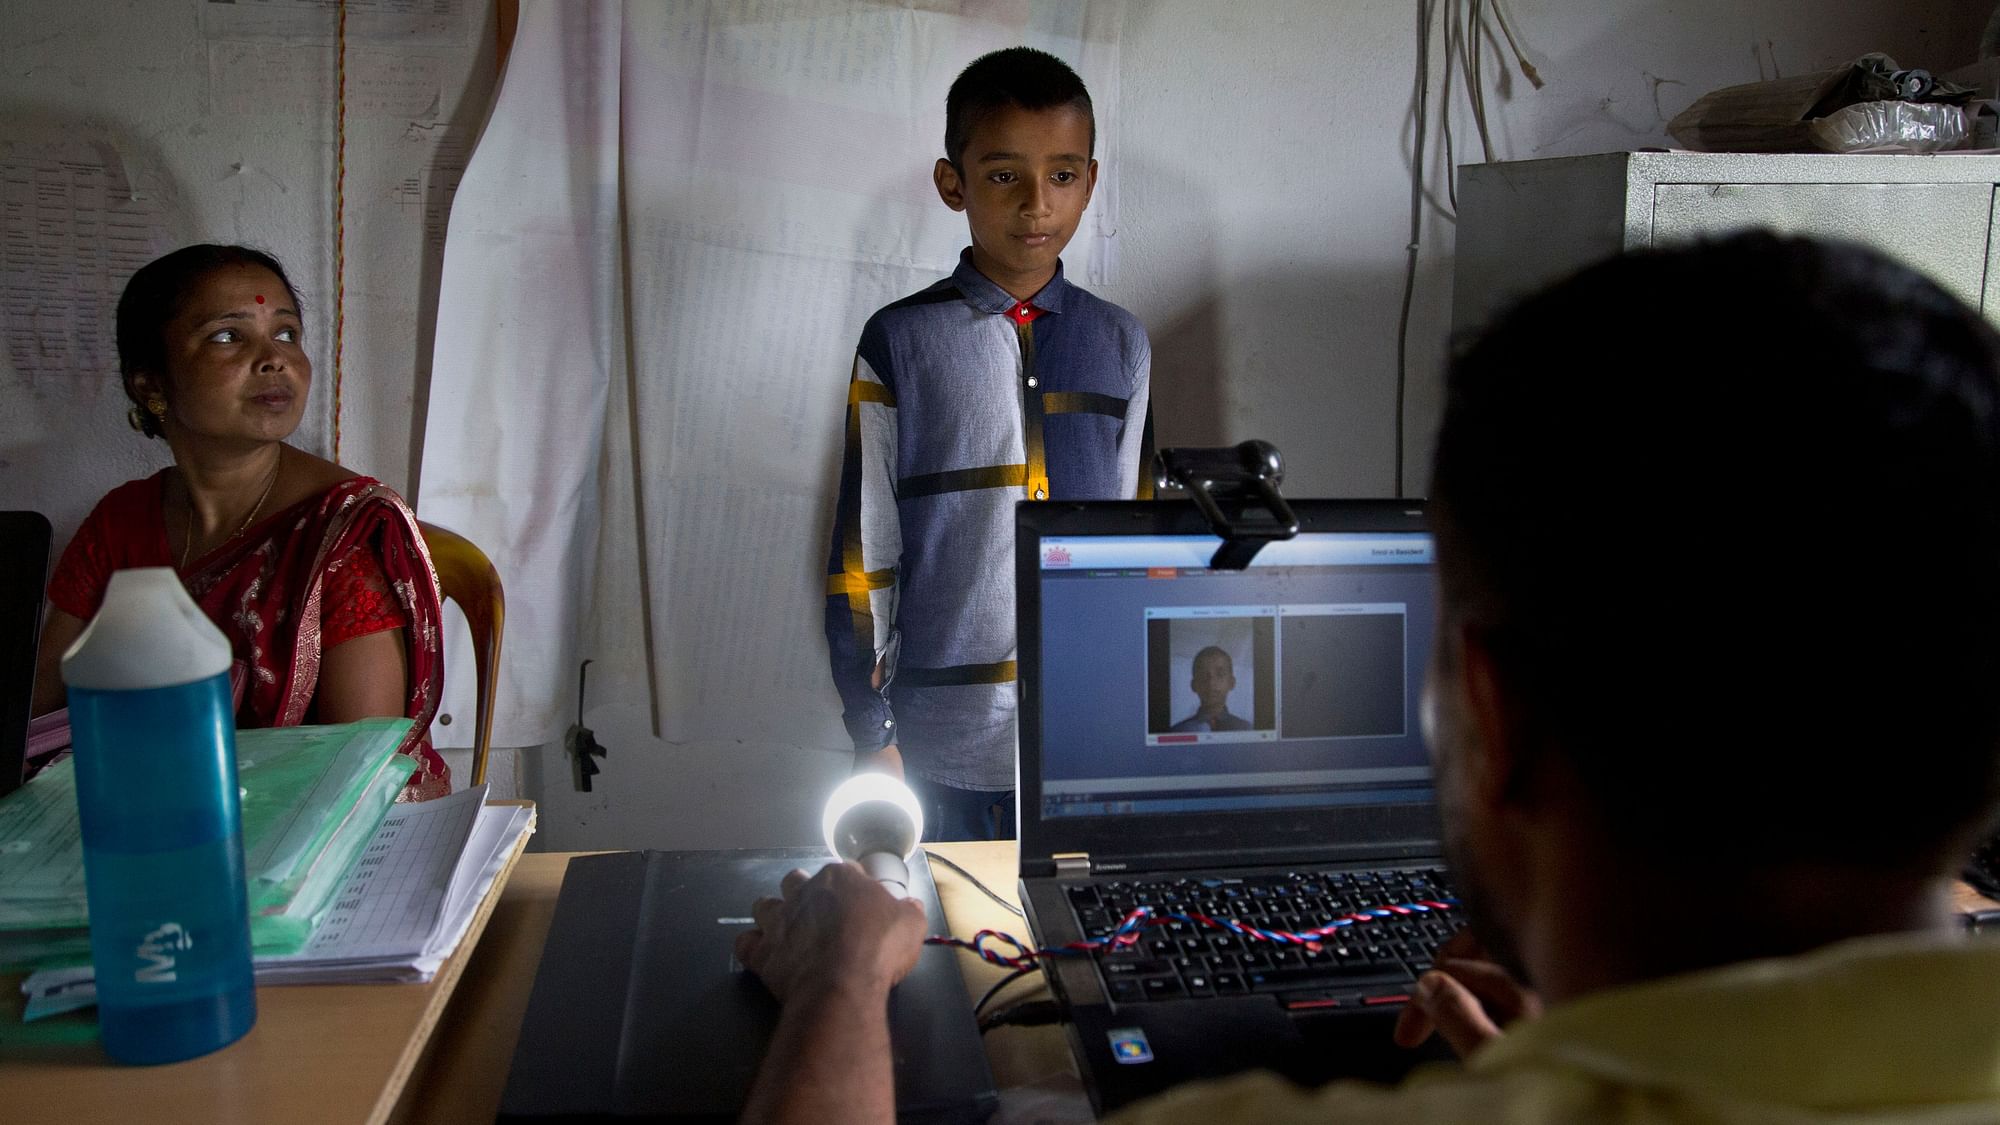 A National Register of Citizens (NRC) officer takes a photograph of a boy at an NRC centre.